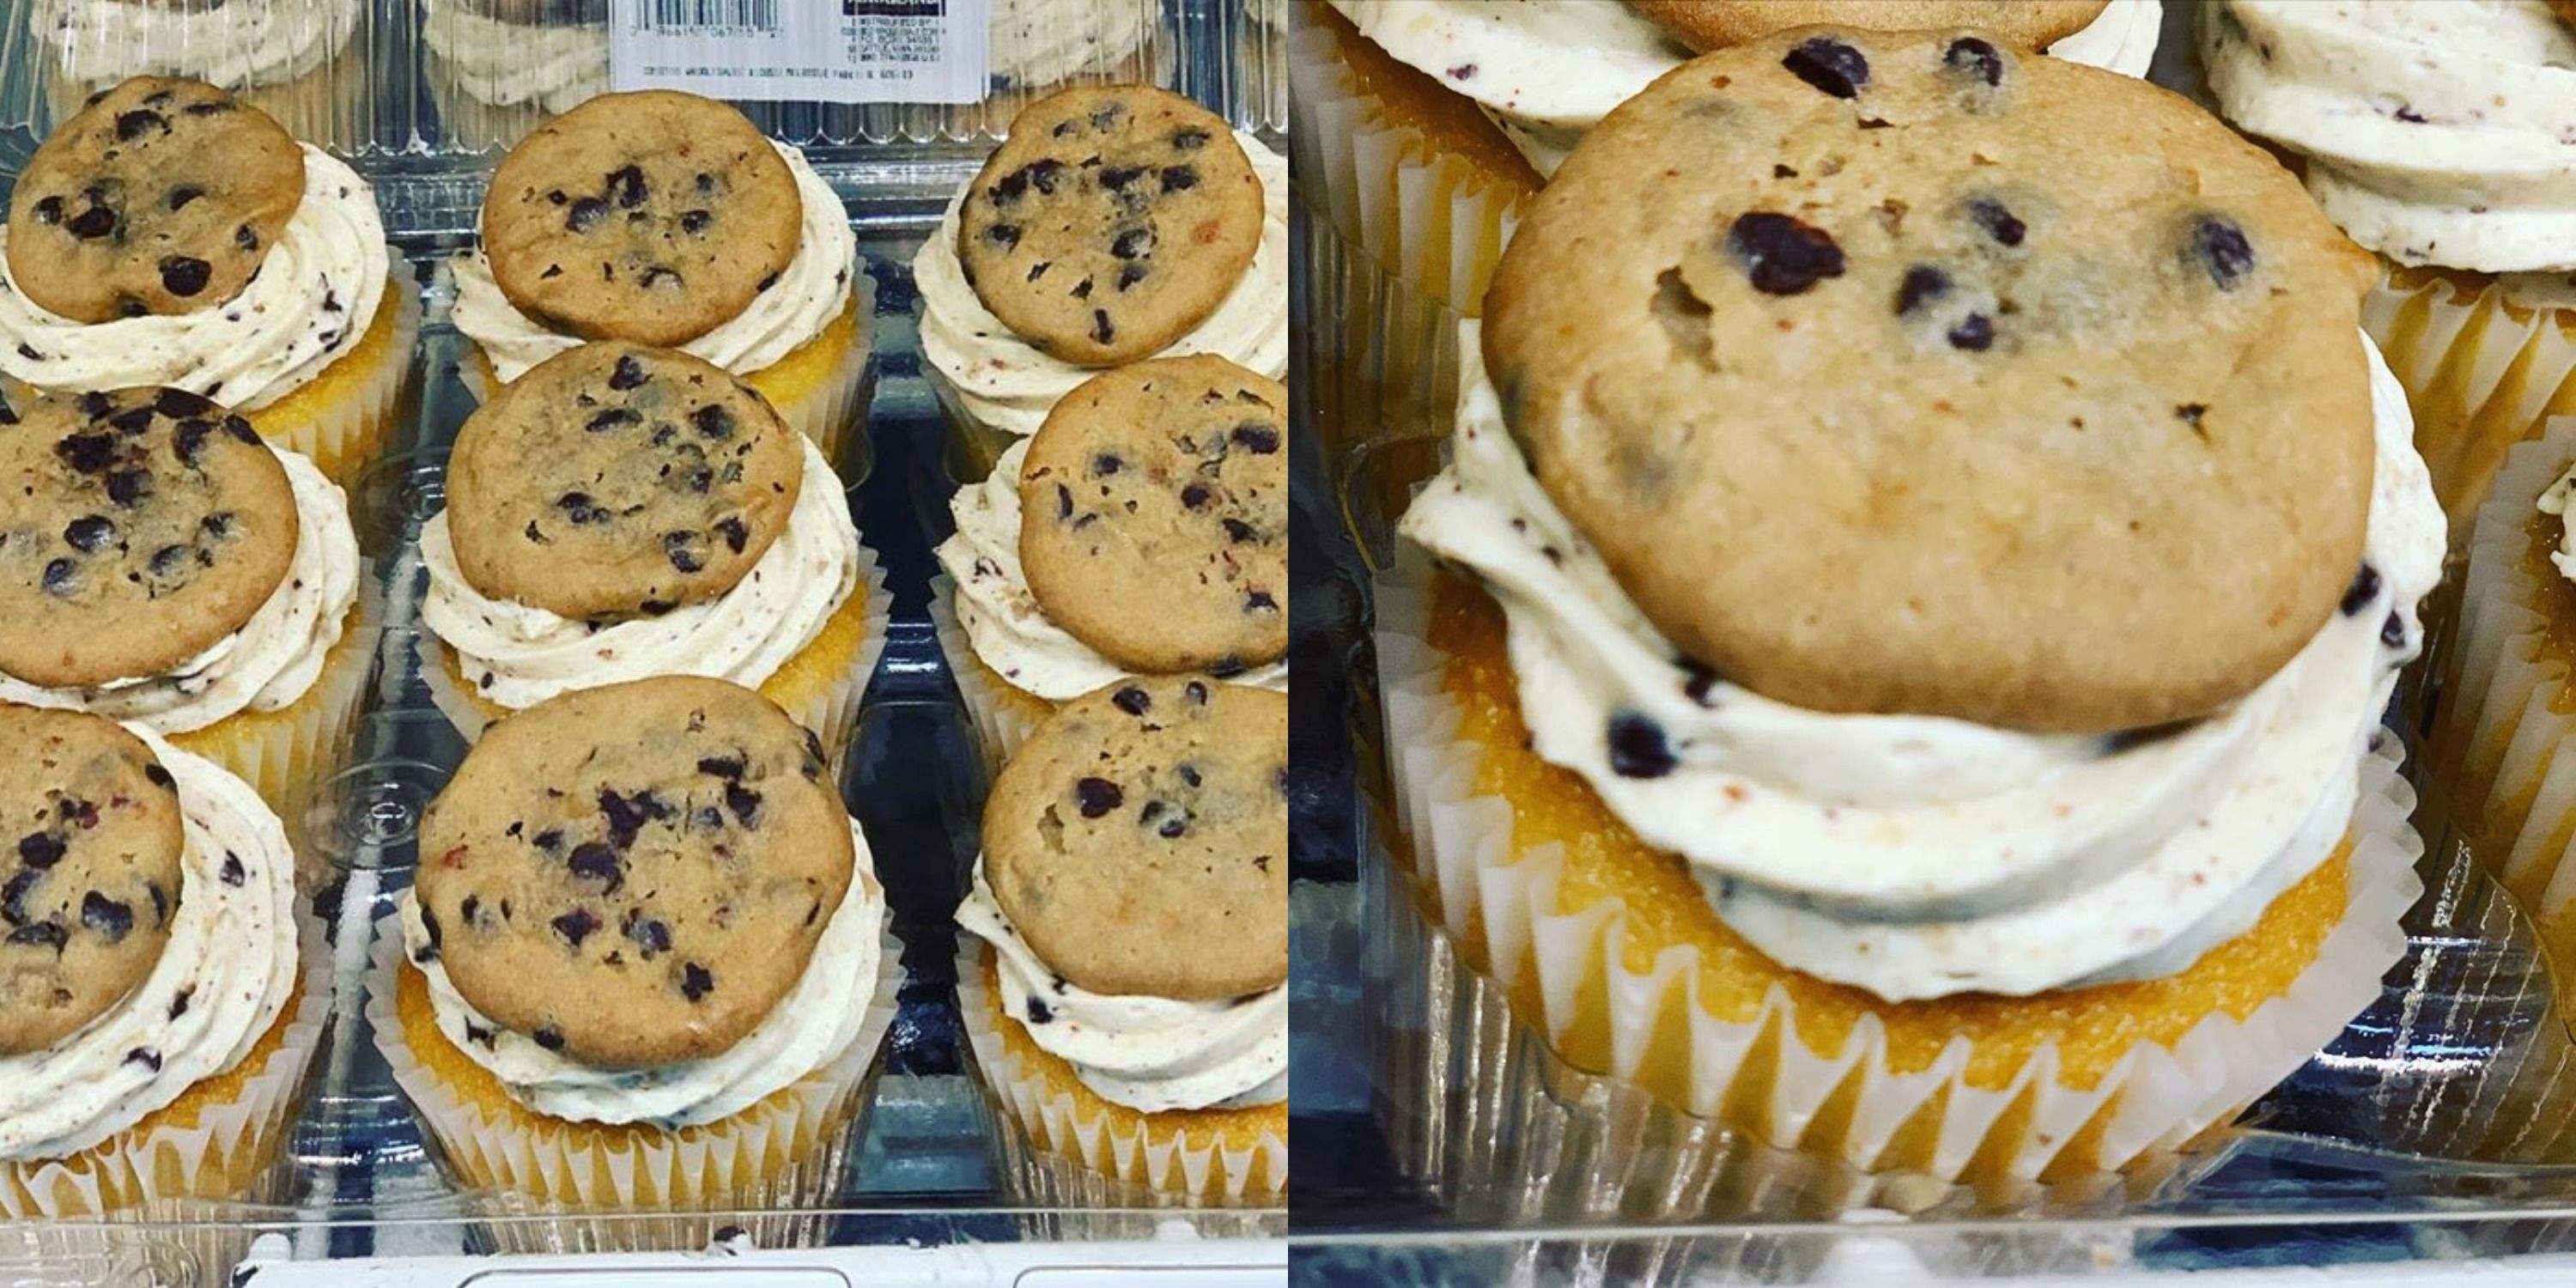 Costco Has Cupcakes Topped With An Entire Chocolate Chip Cookie